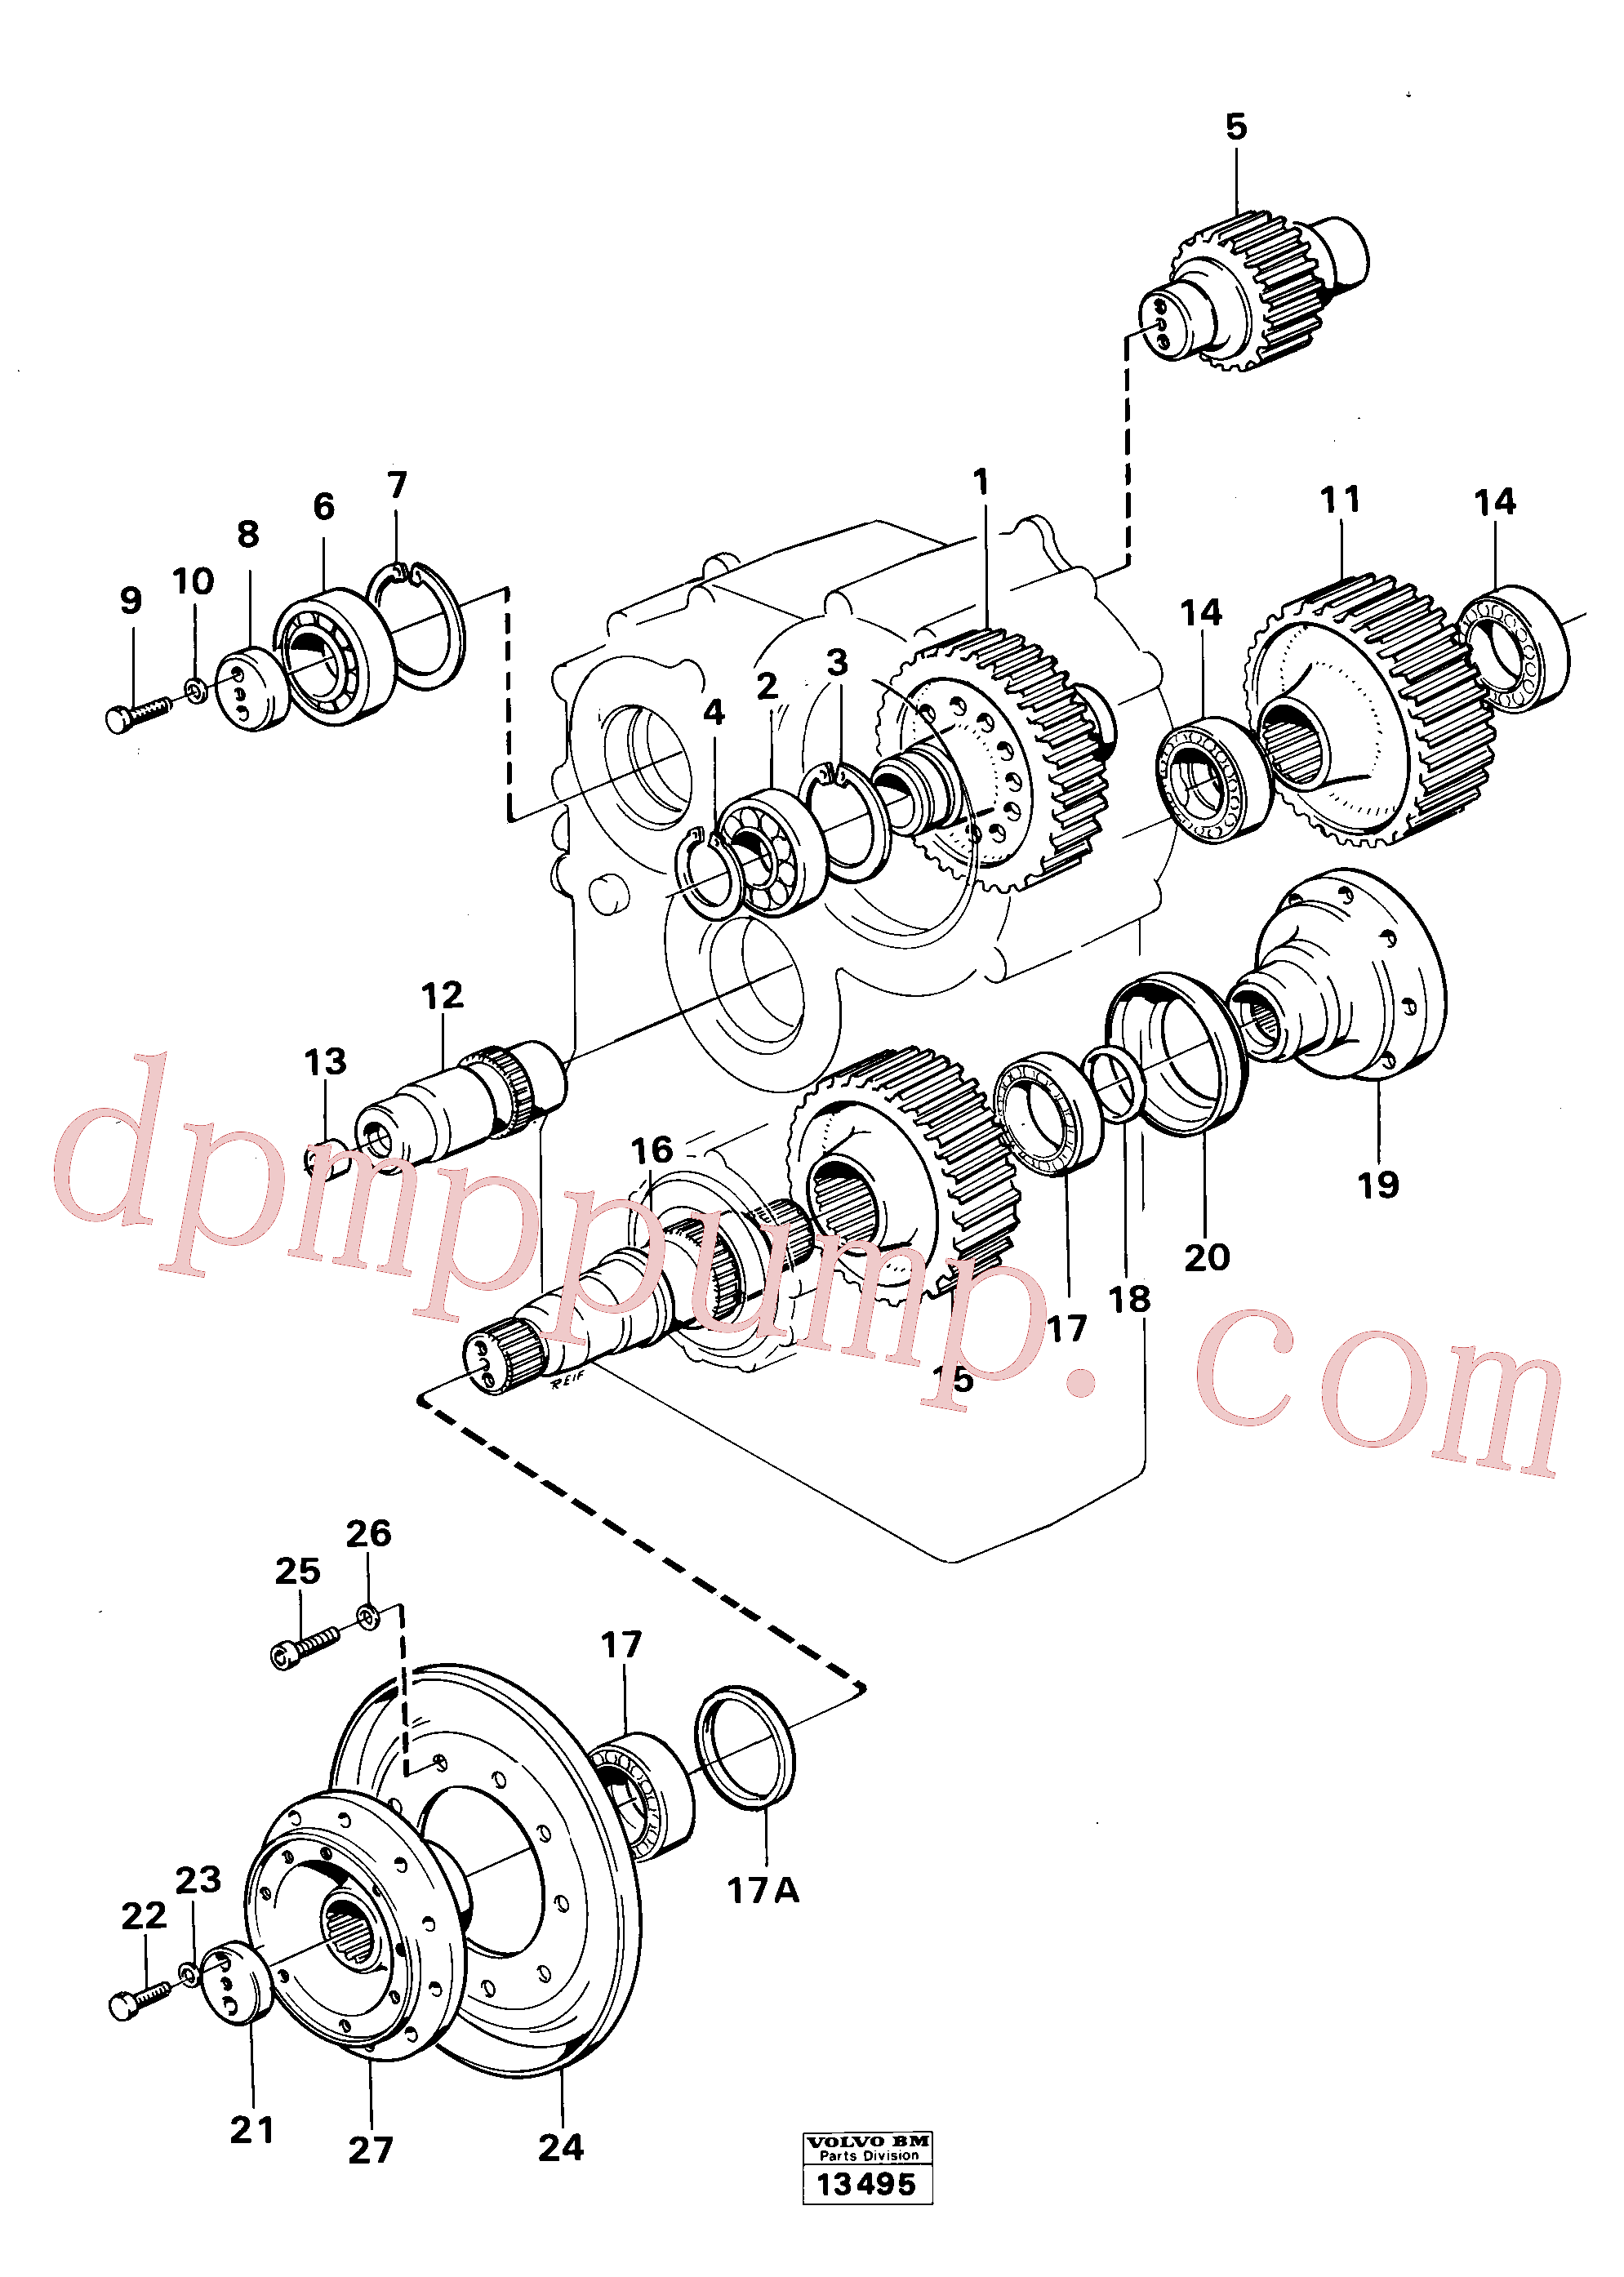 SA9541-02100 for Volvo Dropbox gears and shafts(13495 assembly)